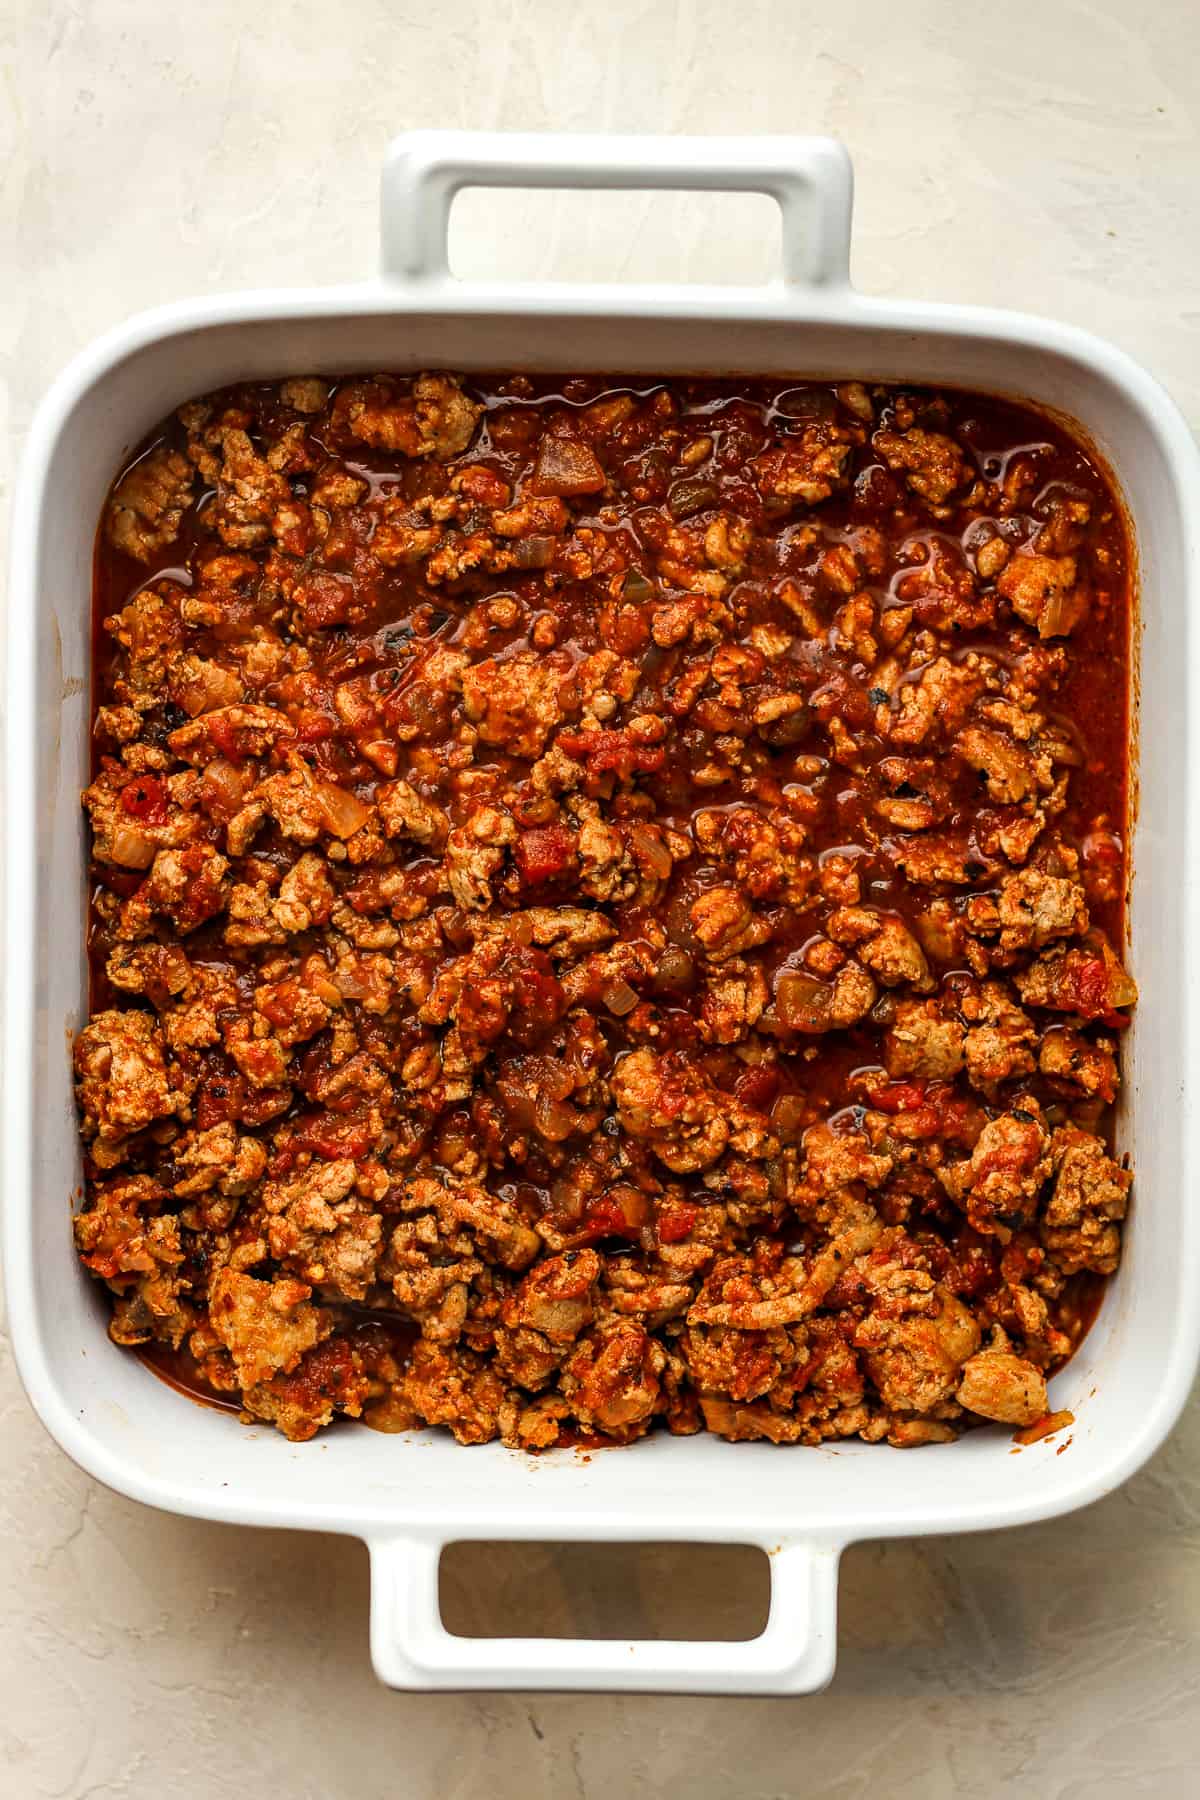 A dish of the meat mixture with tomatoes.